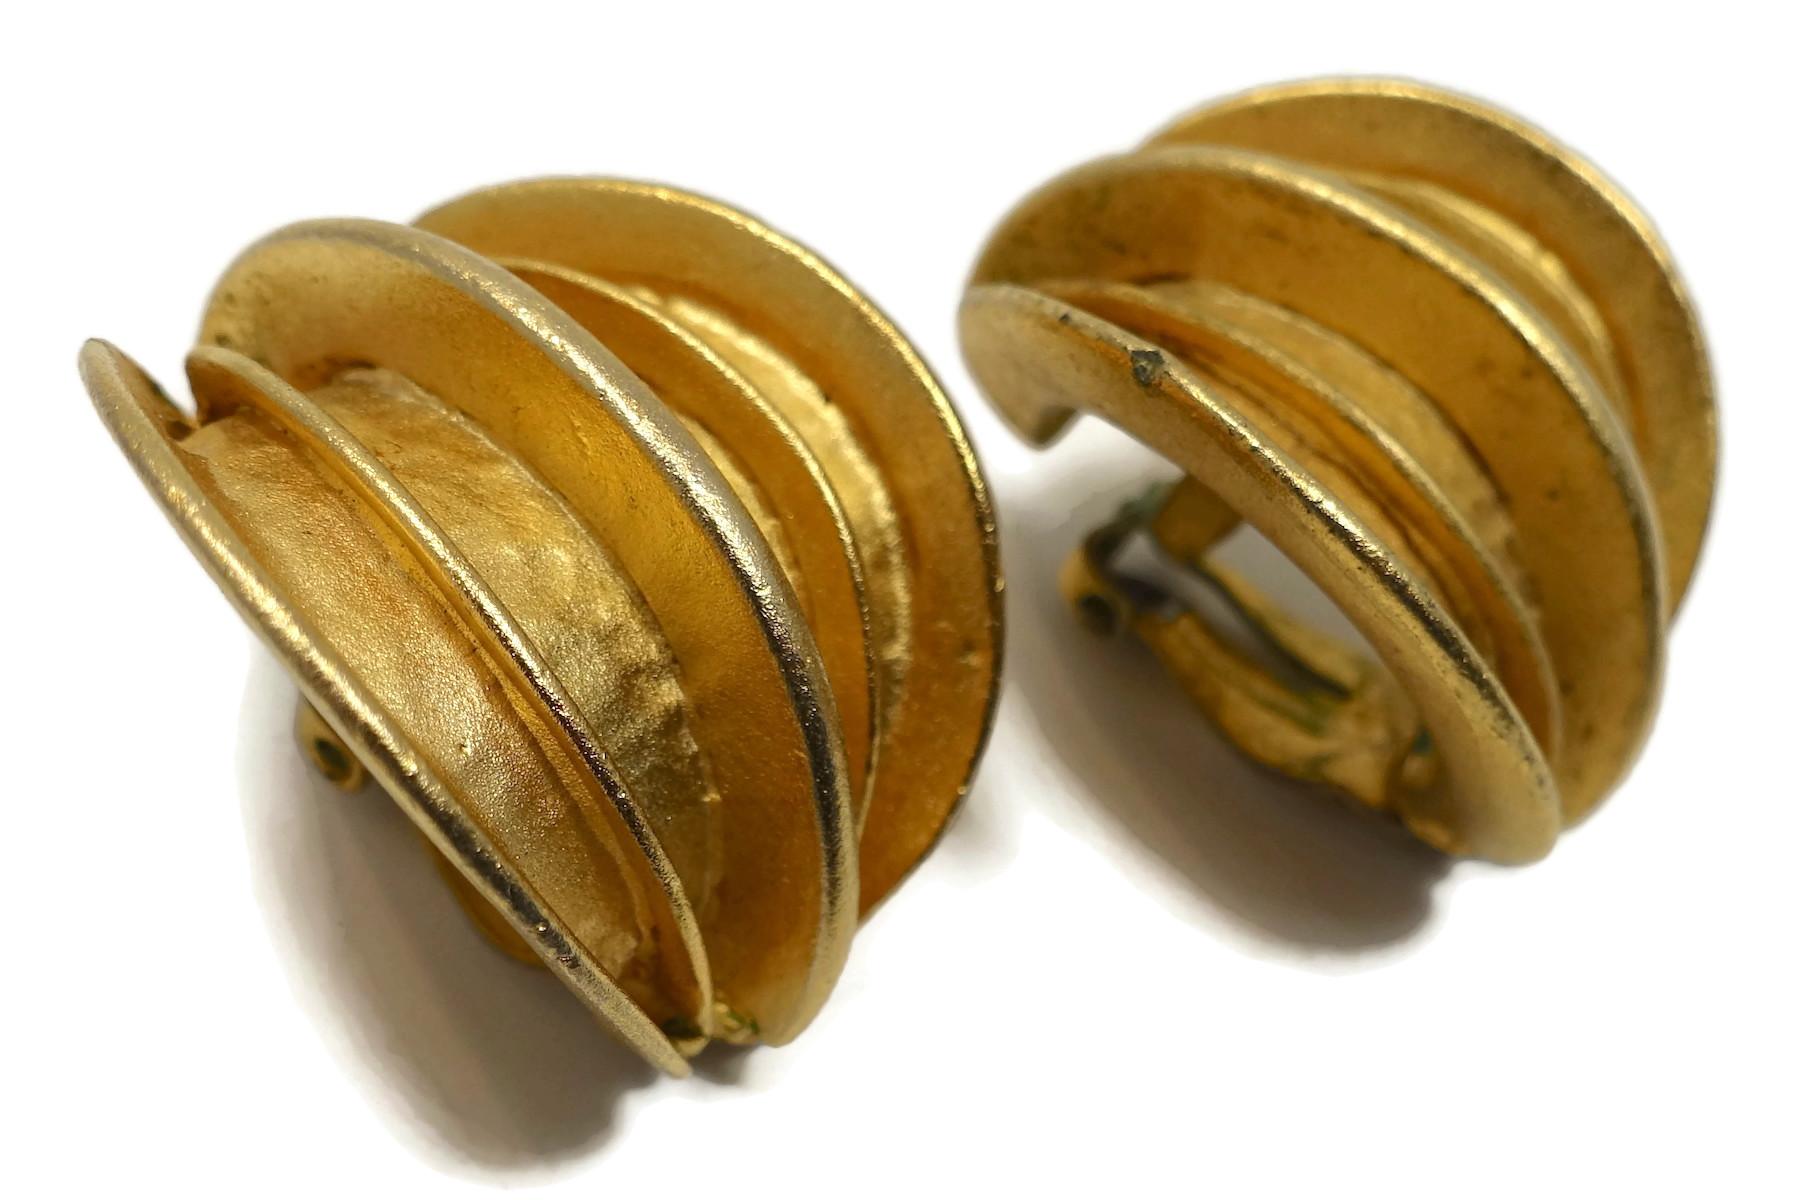 These vintage earrings have a ribbed design in a gold tone setting.  In excellent condition, these clip earrings measure 1-1/4” x 1”.